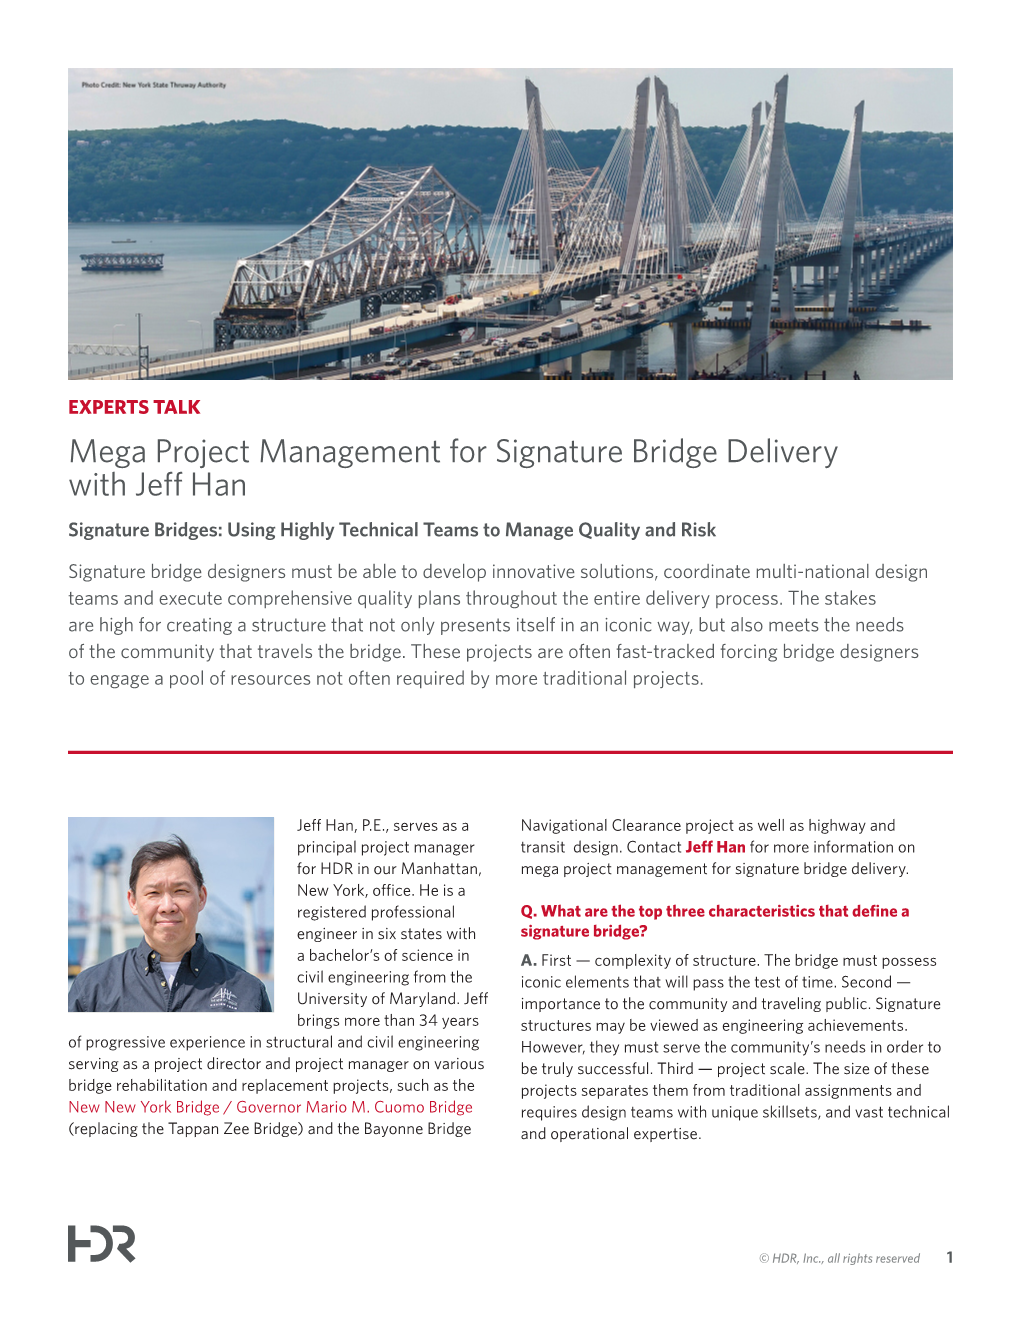 Mega Project Management for Signature Bridge Delivery with Jeff Han Signature Bridges: Using Highly Technical Teams to Manage Quality and Risk